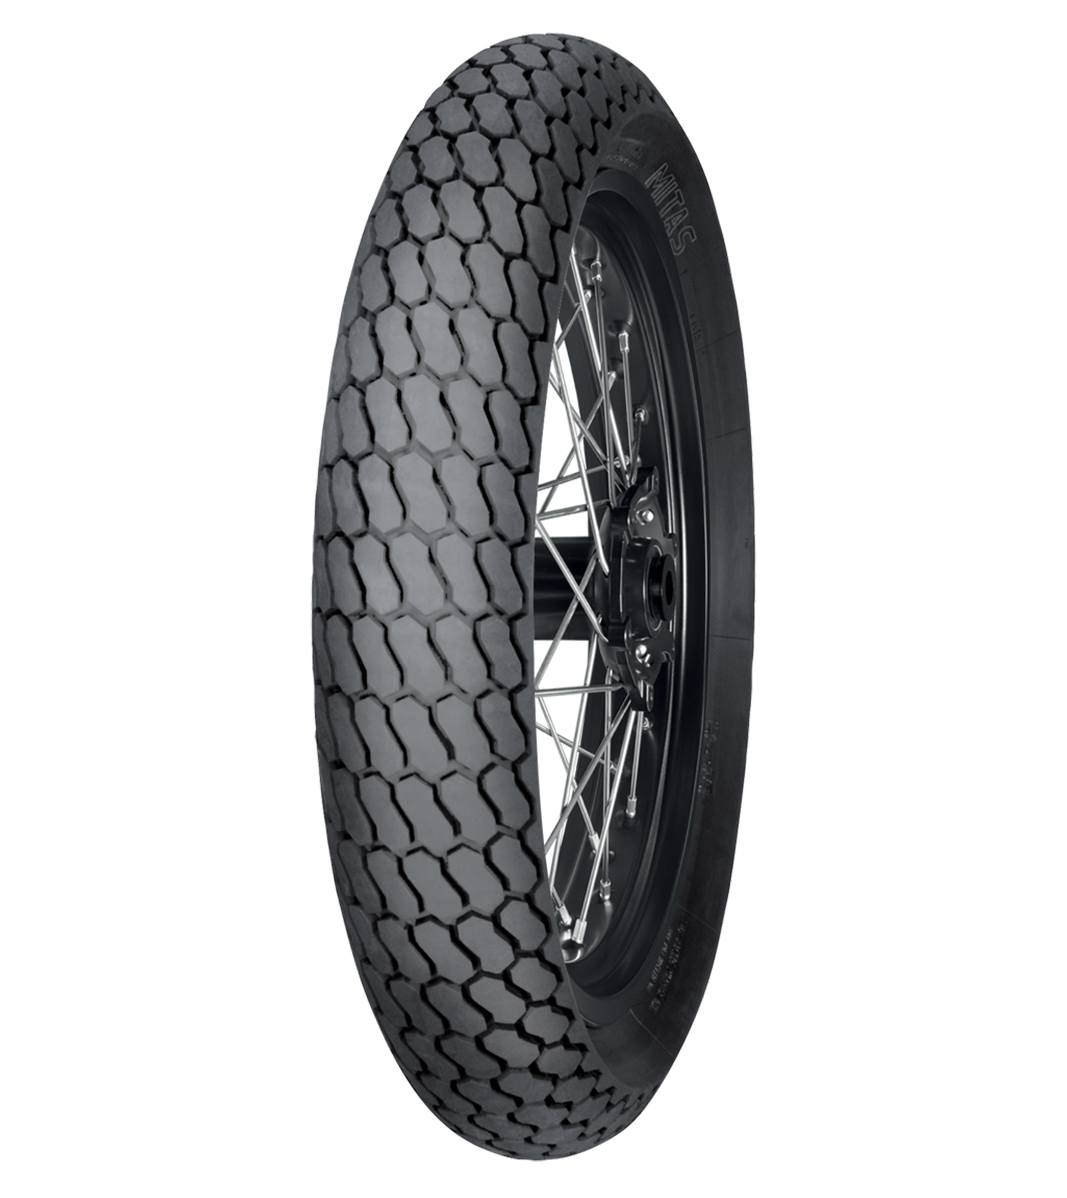 Mitas H-18 FLAT TRACK 140/80-19 (27.5x7.5-19) Flat Track Off-Road NHS 2 Green Tube Rear Tire, 223432, 140/80-19, Flat Track, H-18 Flat Track, Off-Road, Rear, Tires - Imported and distributed in North &amp; South America by Lindeco Genuine Powersports - Premier Powersports Equipment and Accessories for Motorcycle Enthusiasts, Professional Riders and Dealers.